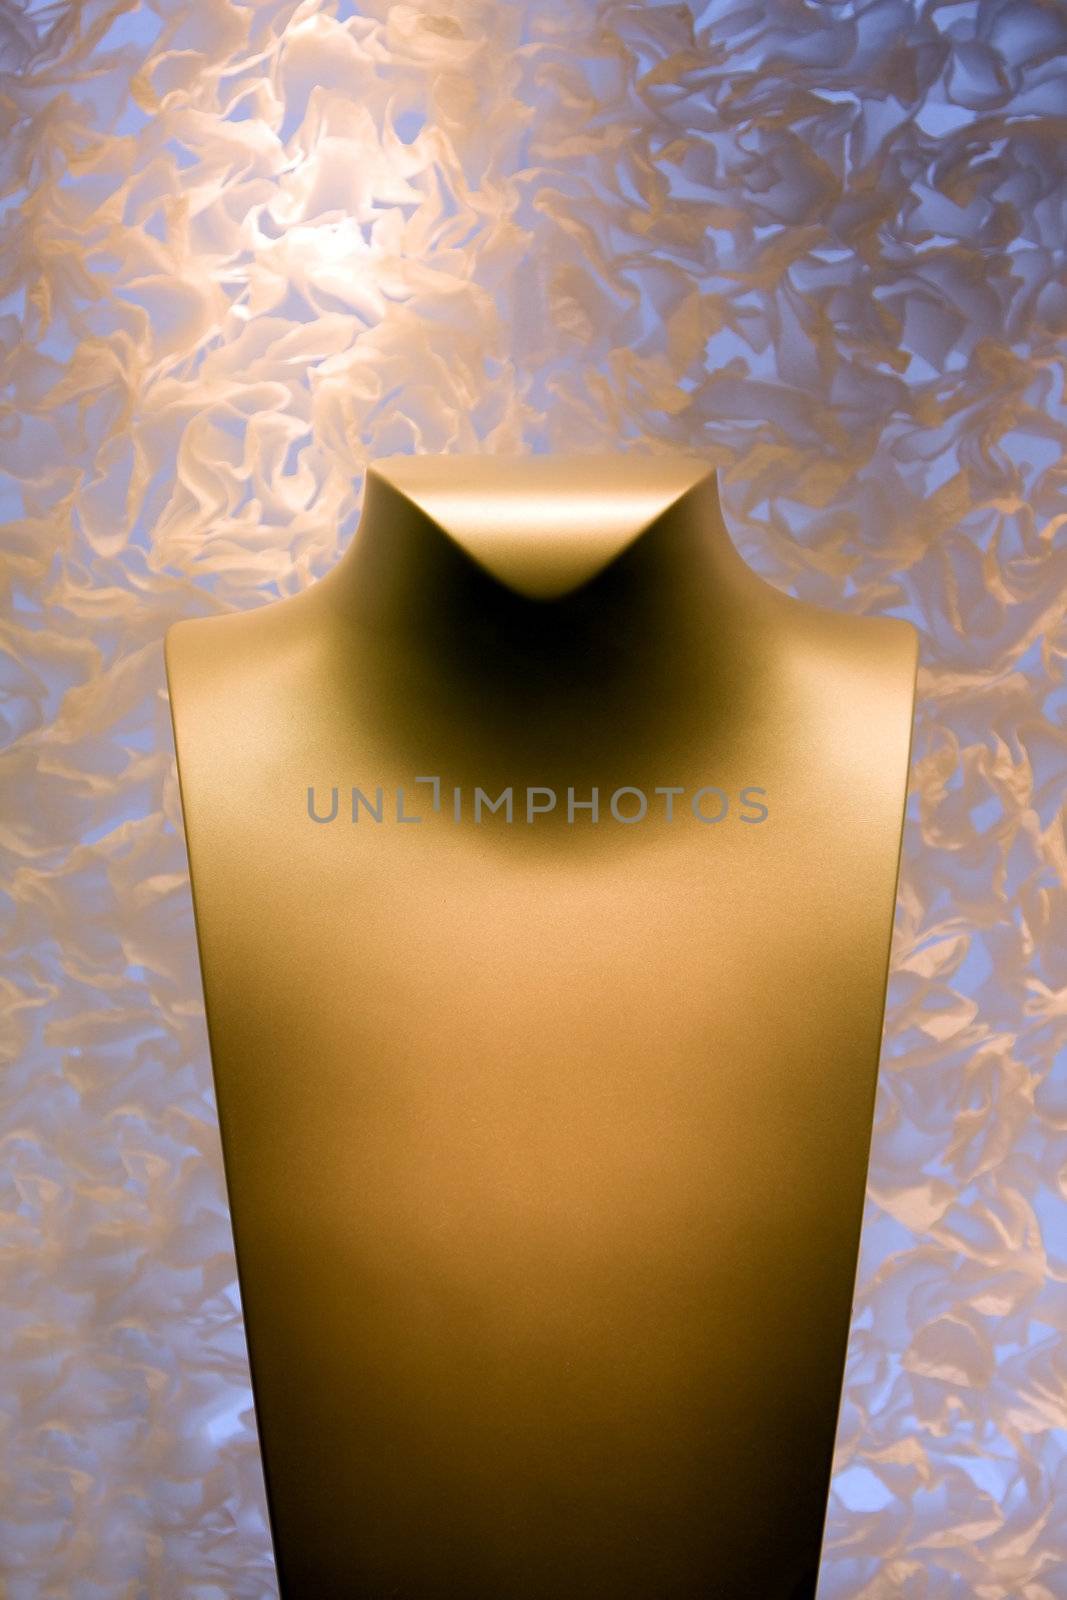 A golden yellow color neck form for display of necklace jewelry on a fluffy background